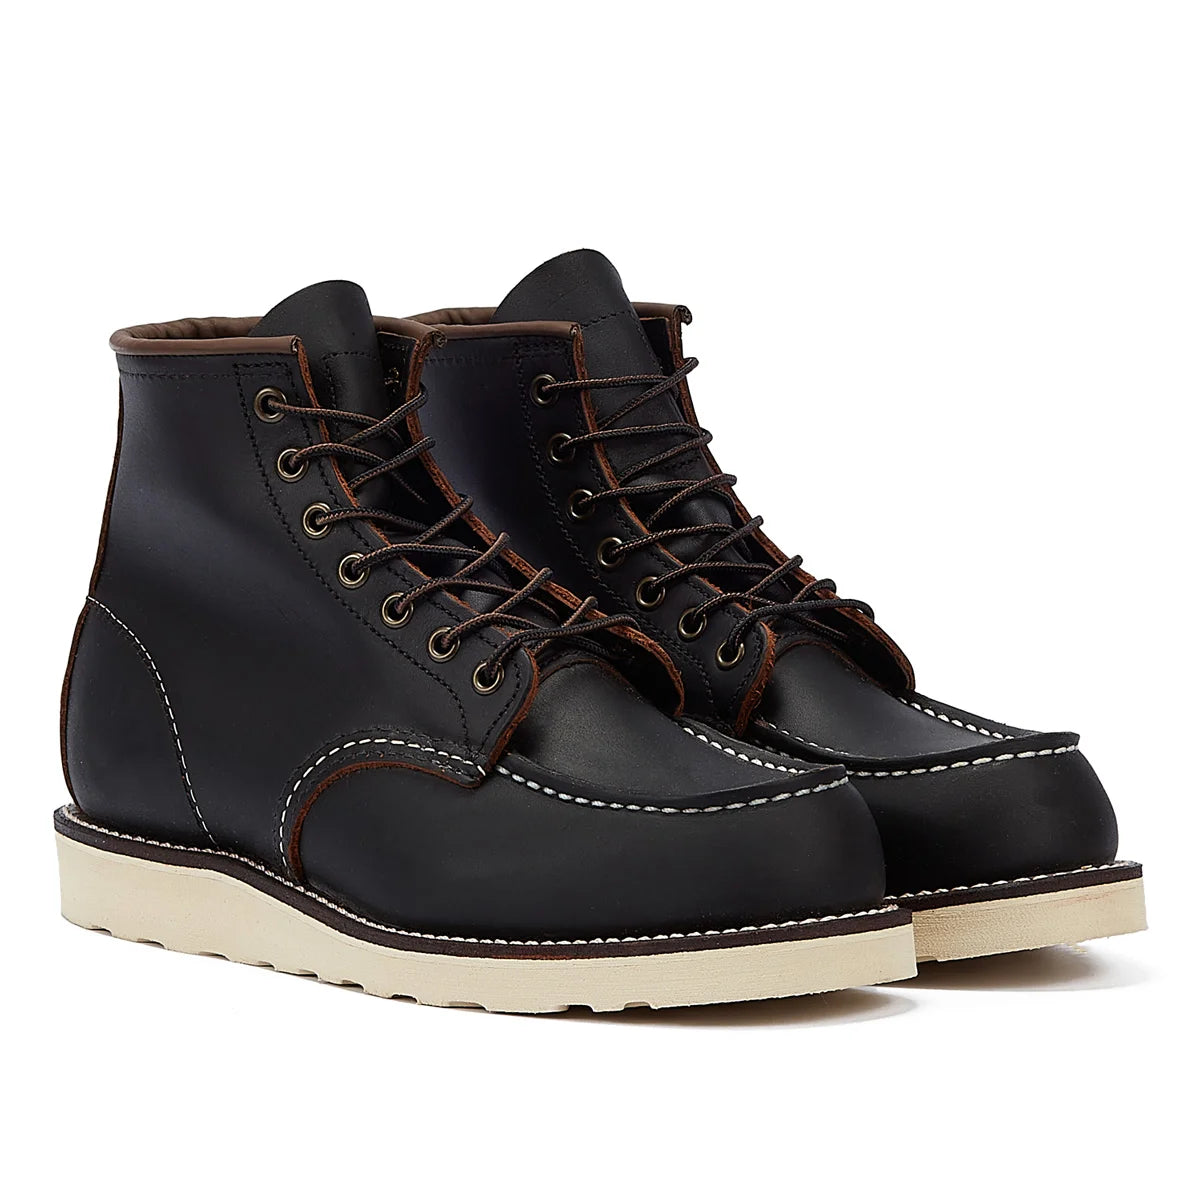 Red Wing Shoes Heritage Work 6Inch Moc Toe Prairie Men’s Black Boots